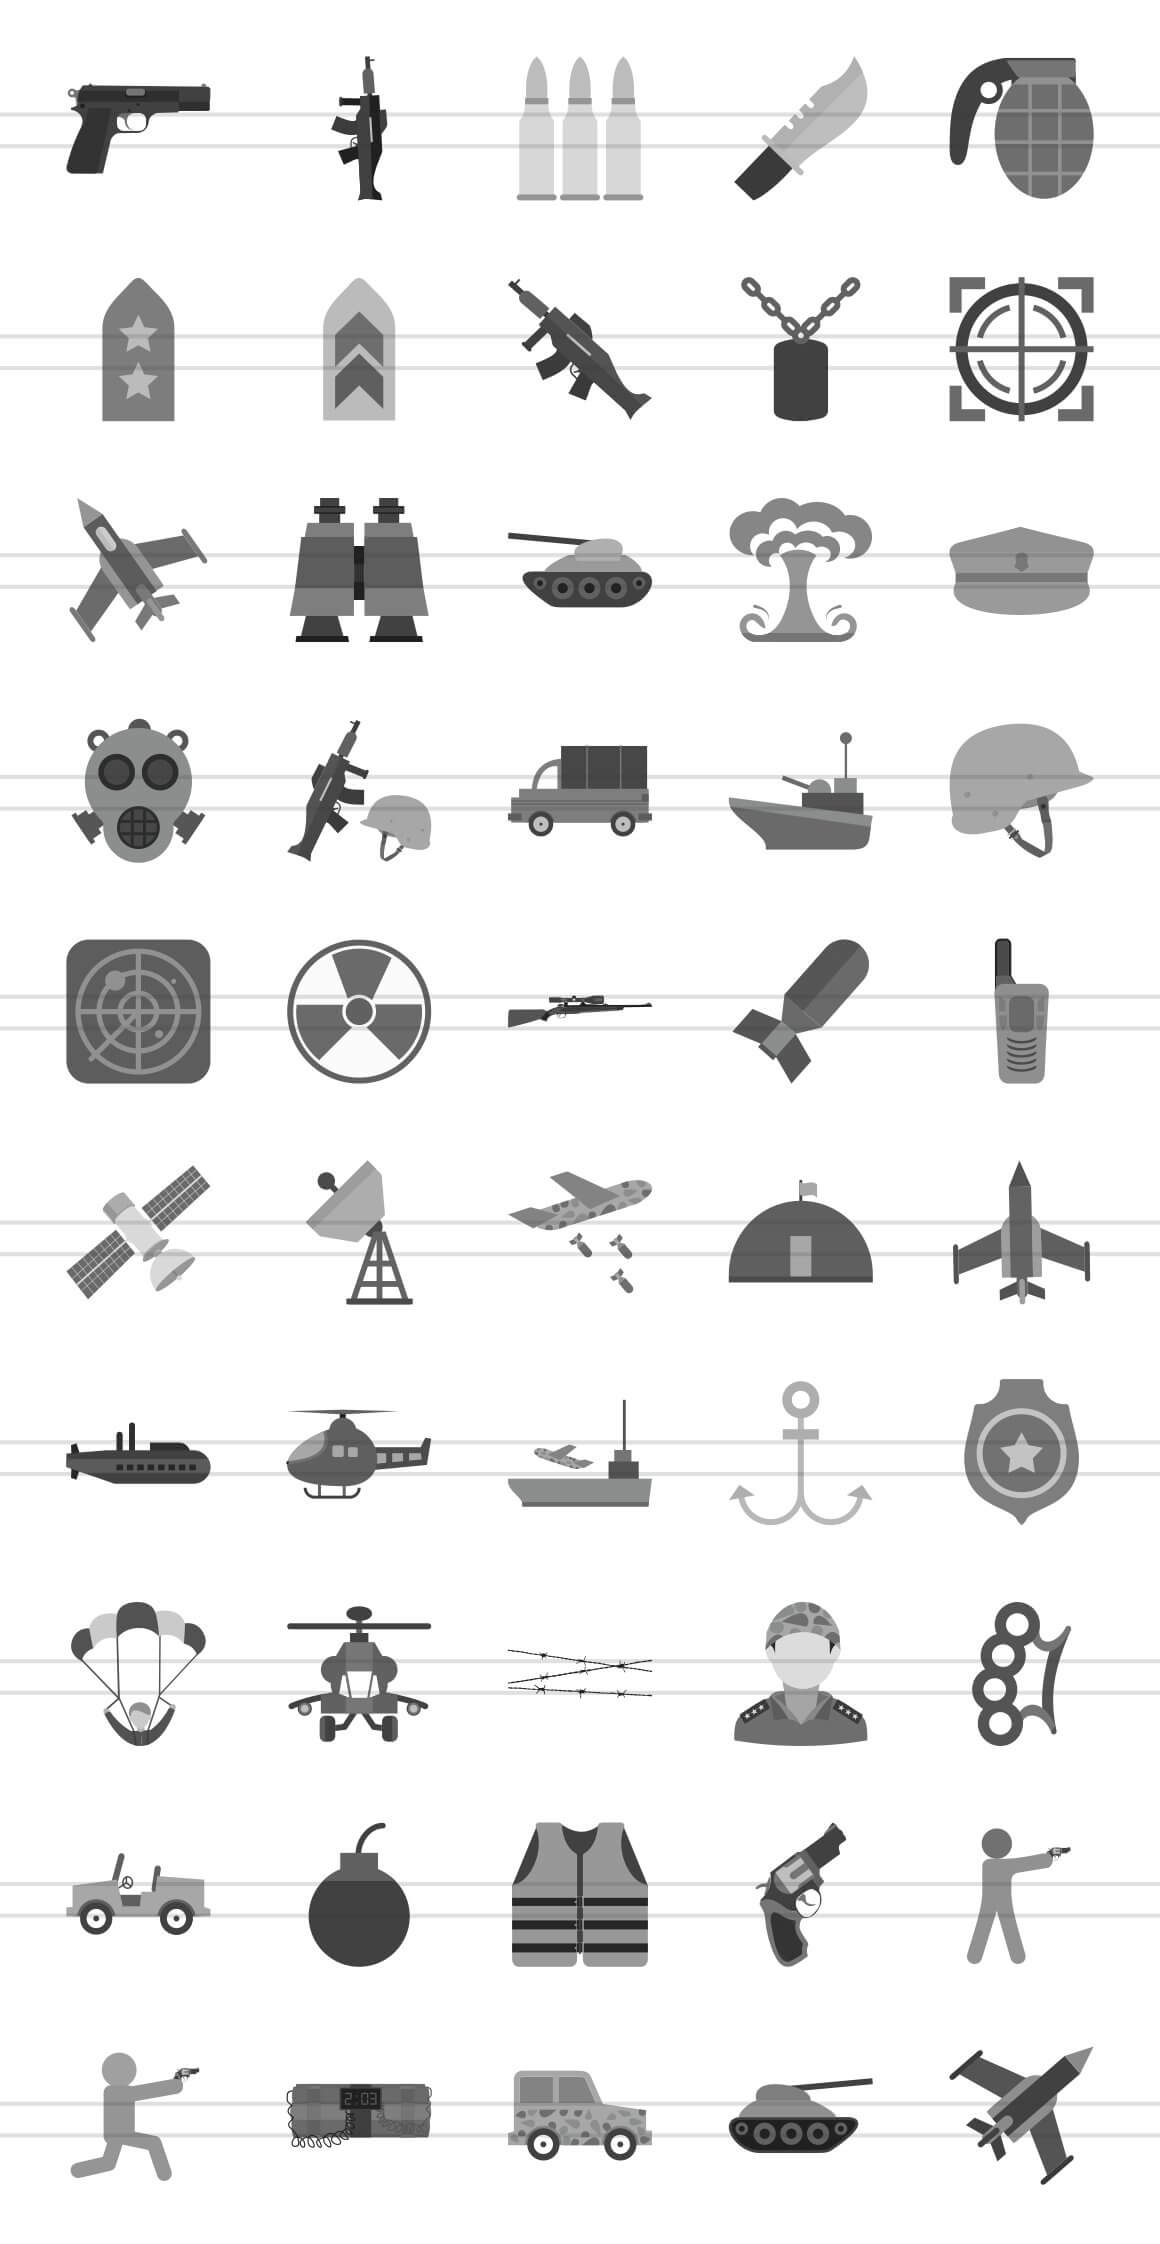 Gray icons with the image of military equipment units.